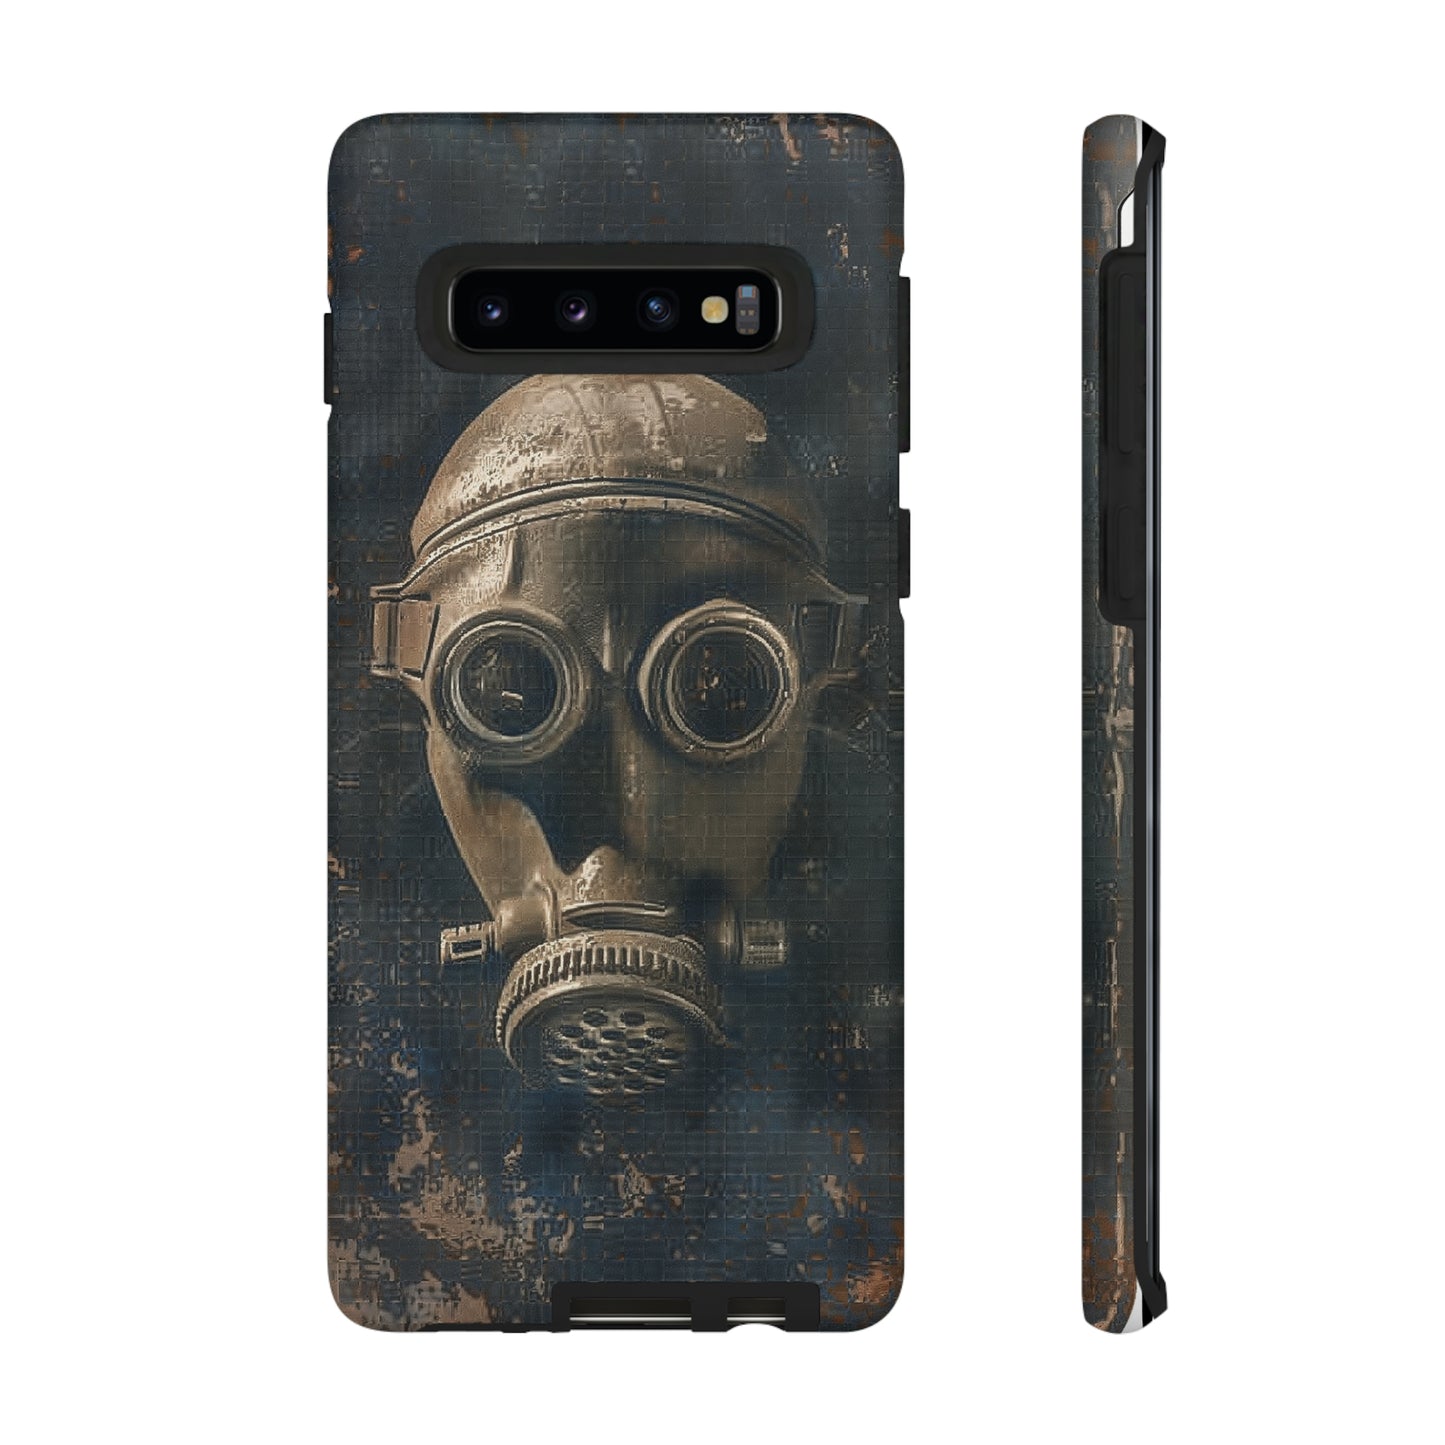 Edgy Gas Mask Smartphone Case